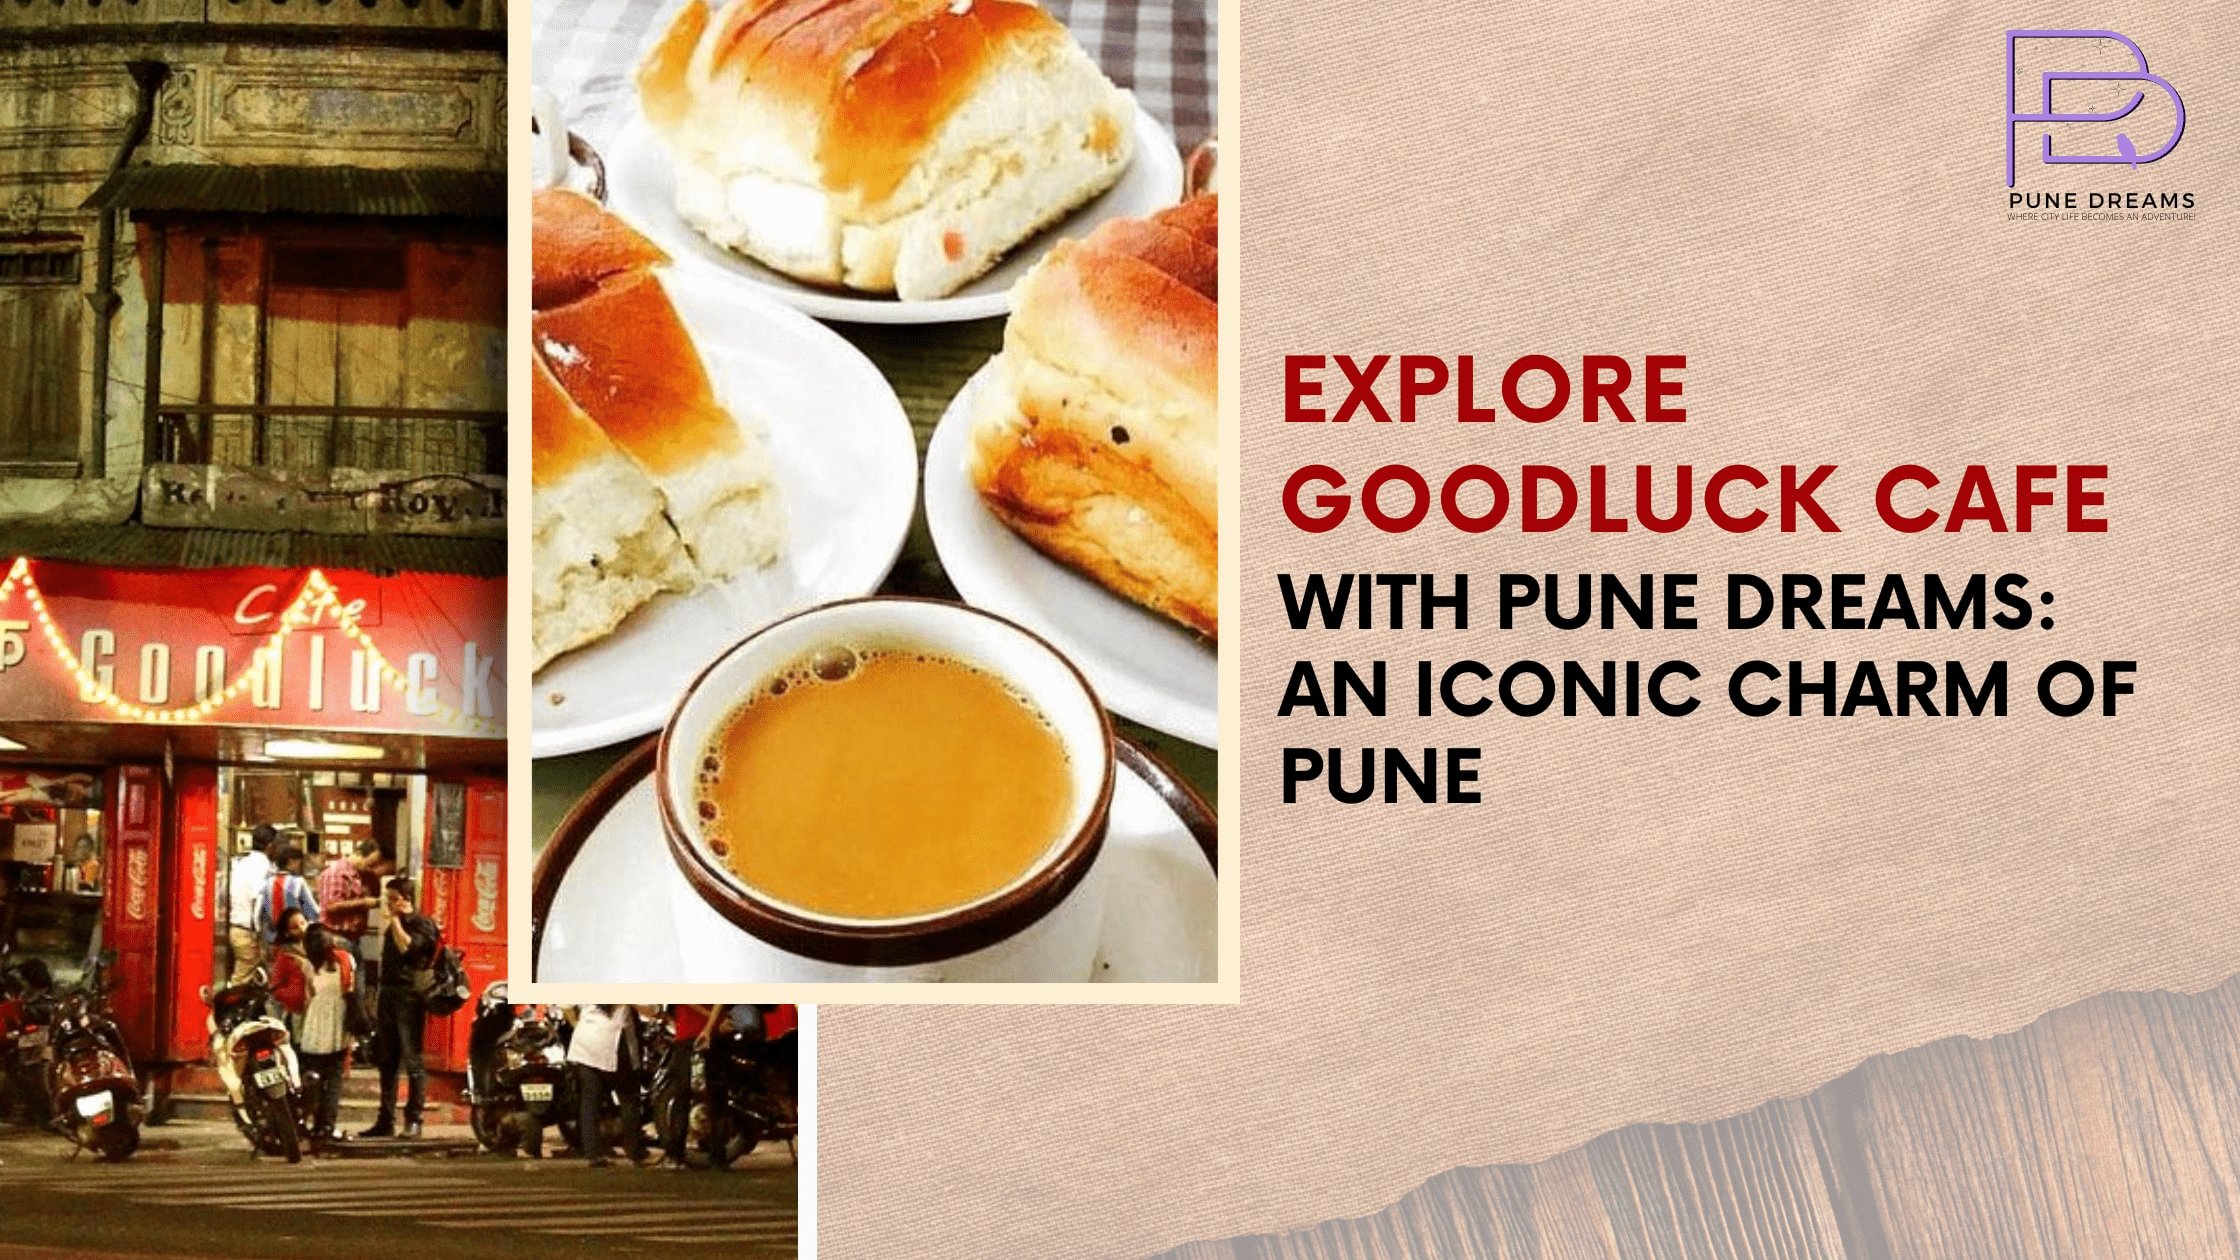 Explore Goodluck Cafe with Pune Dreams: An Iconic Charm of Pune